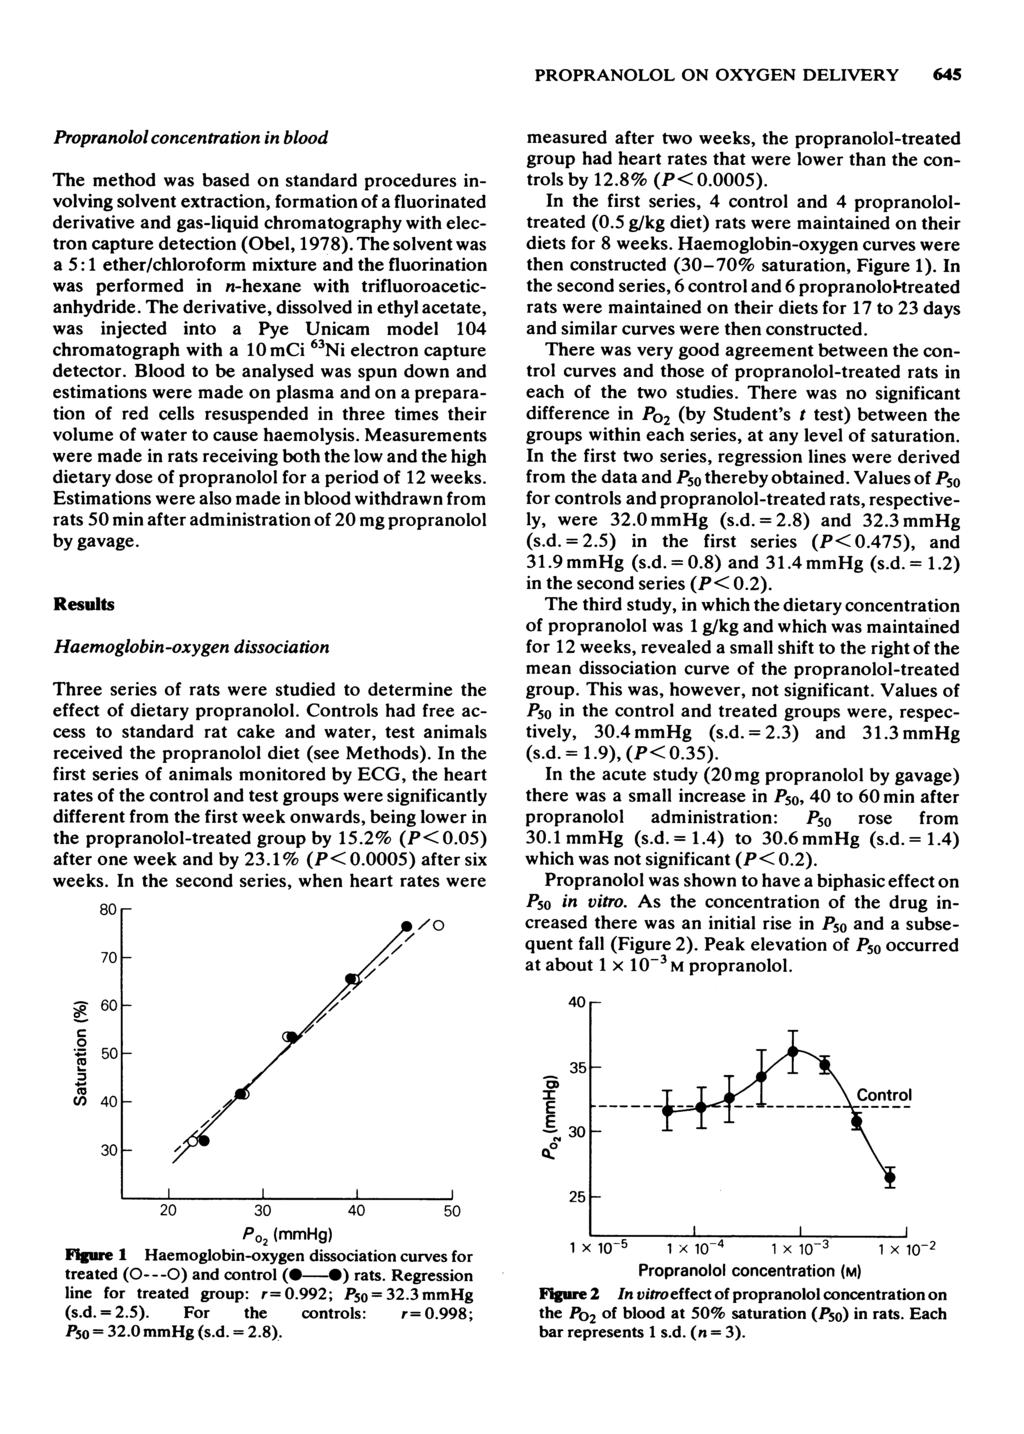 PROPRANOLOL ON OXYGEN DELIVERY 645 Propranolol concentration in blood The method was based on standard procedures involving solvent extraction, formation of a fluorinated derivative and gas-liquid